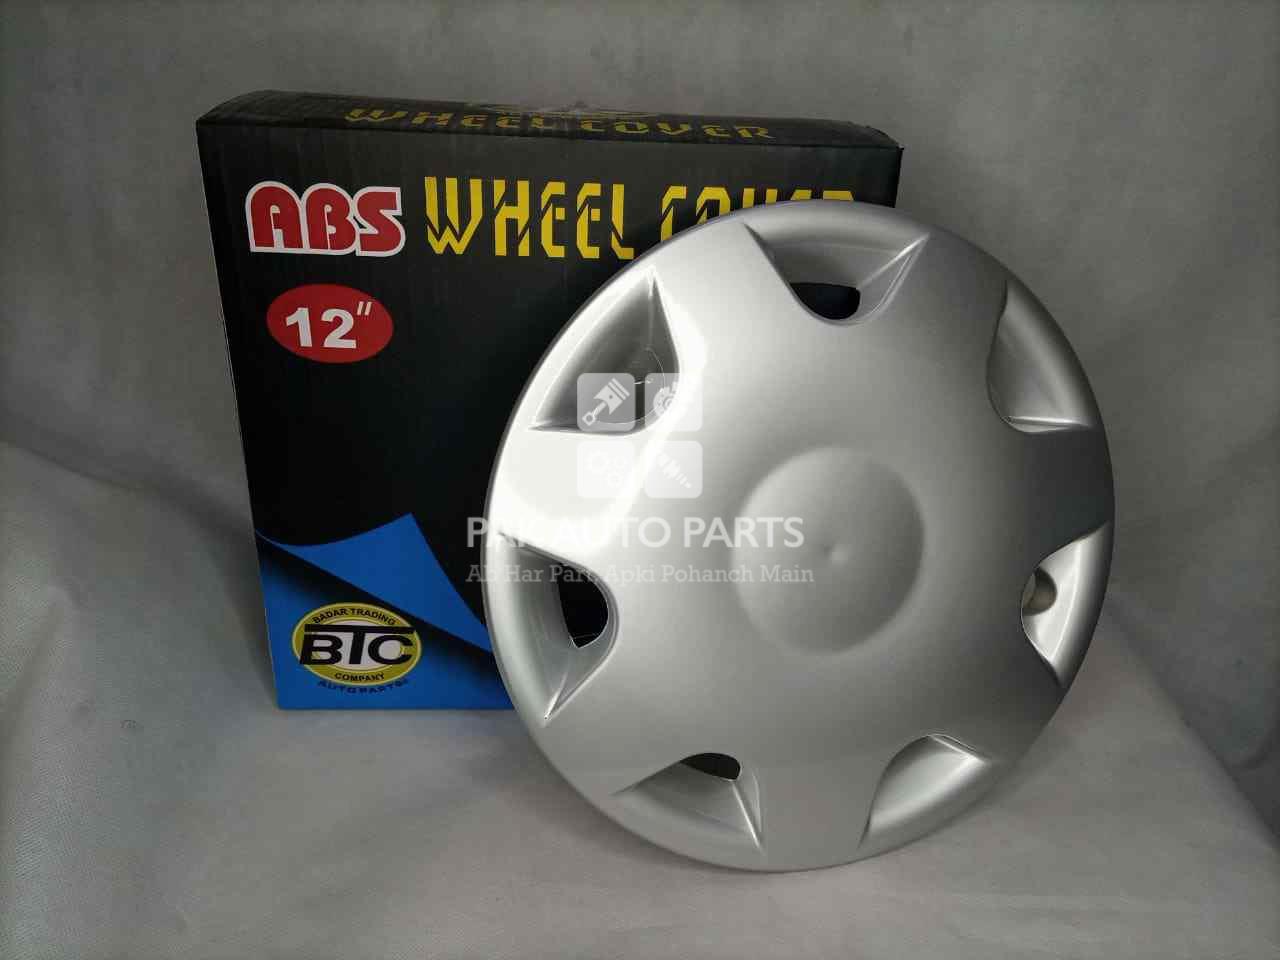 Picture of Suzuki 12 inch ABS  Wheel Covers